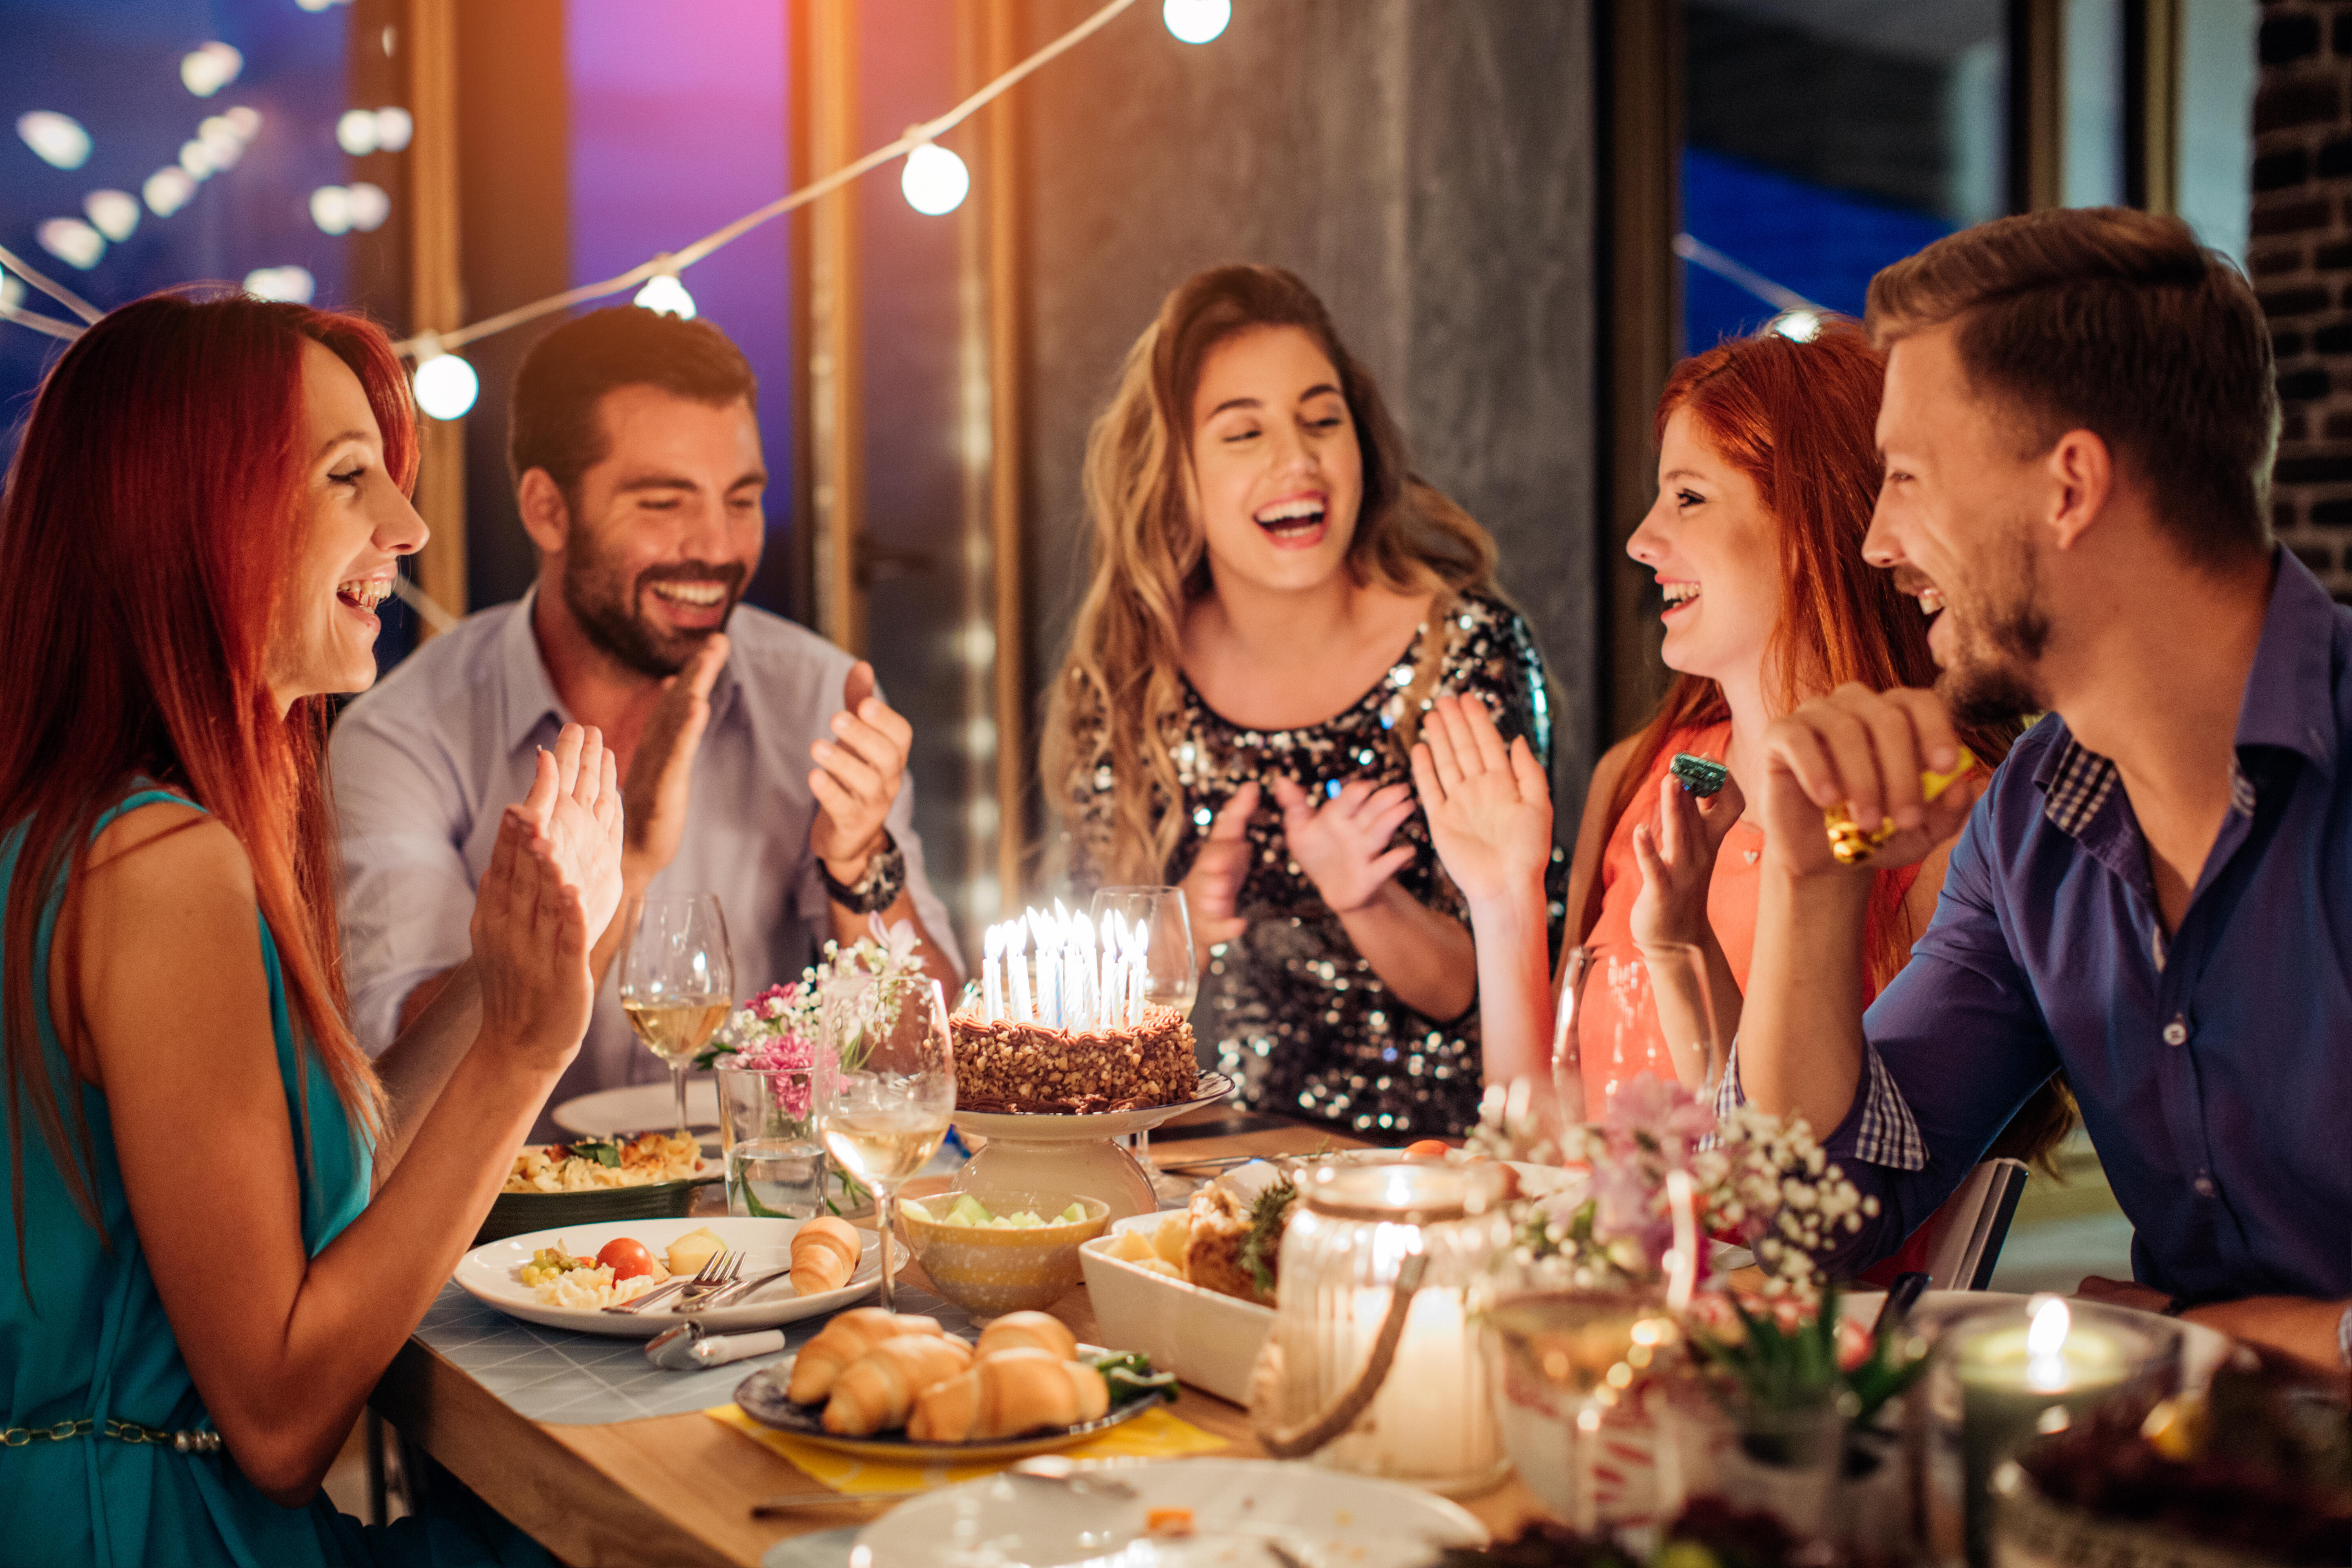 Where to Eat For Free on Your Birthday | iHeart